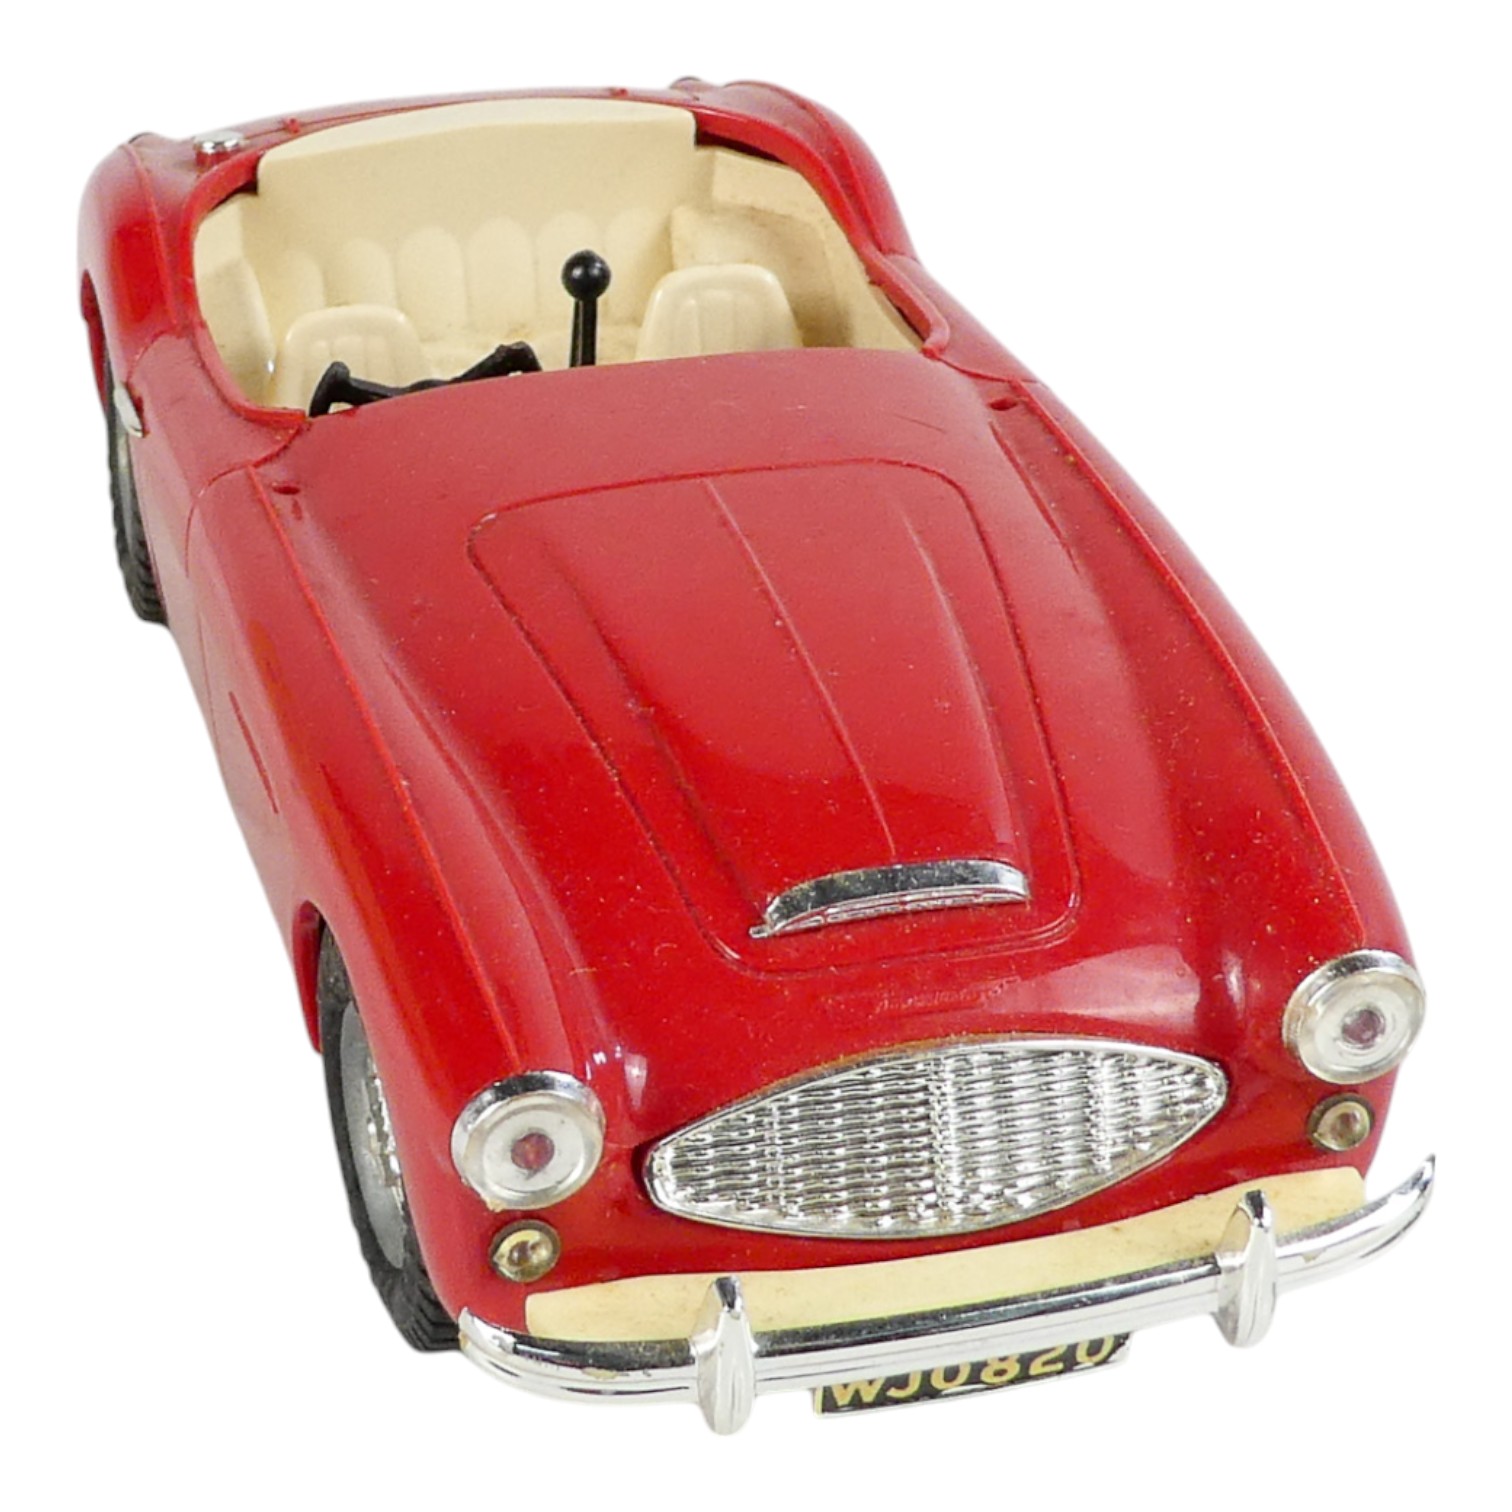 Triang No. M002 - 1/20 Battery Operated Austin Healey 100/6, 1/20 scale, with red bodywork and - Image 4 of 6